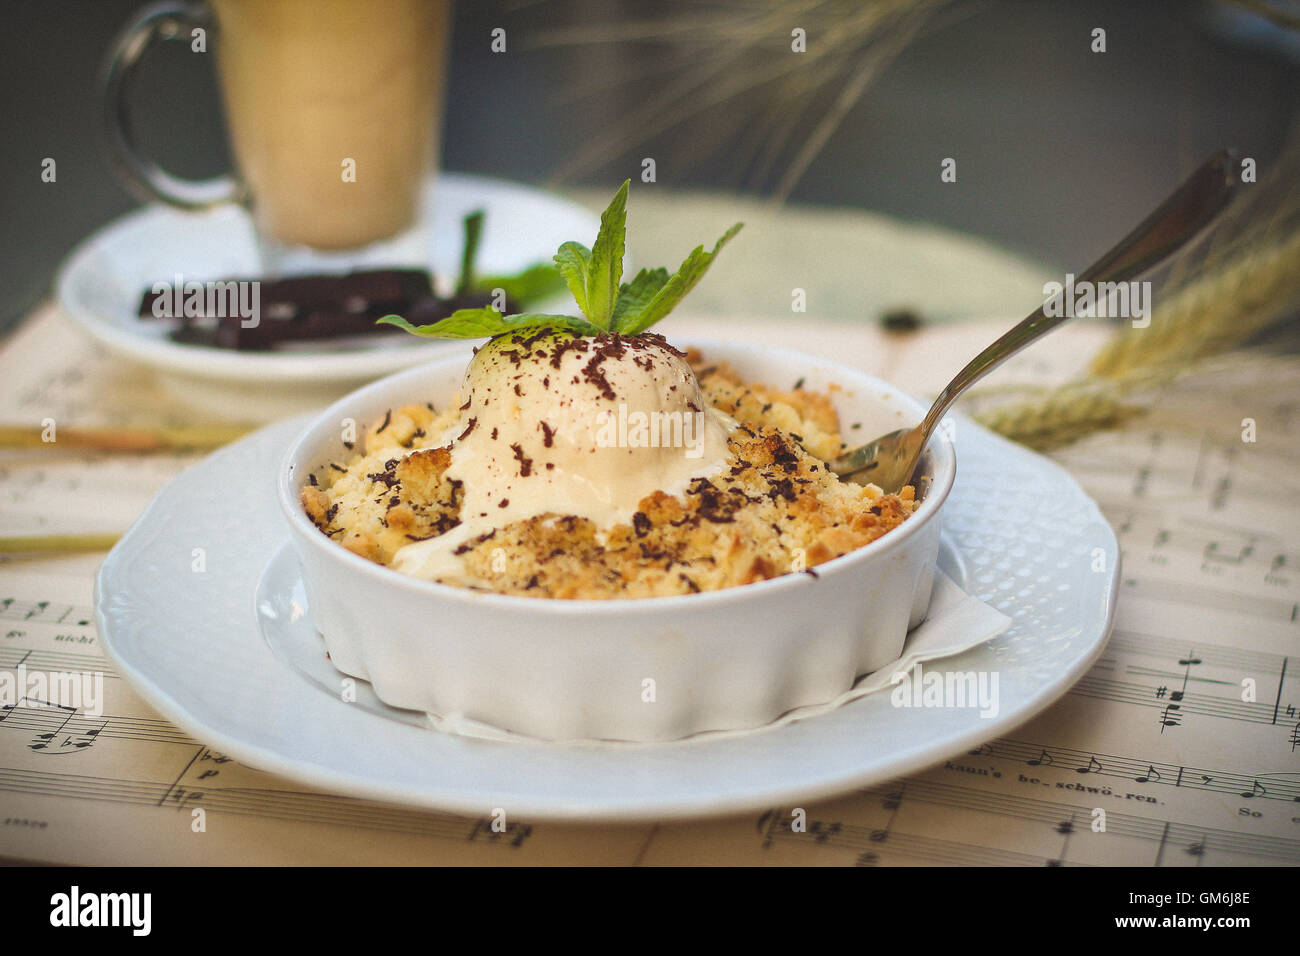 Melting vanilla scoop of ice cream with a mint leave on top of a sweat and crunchy apple pie. Stock Photo